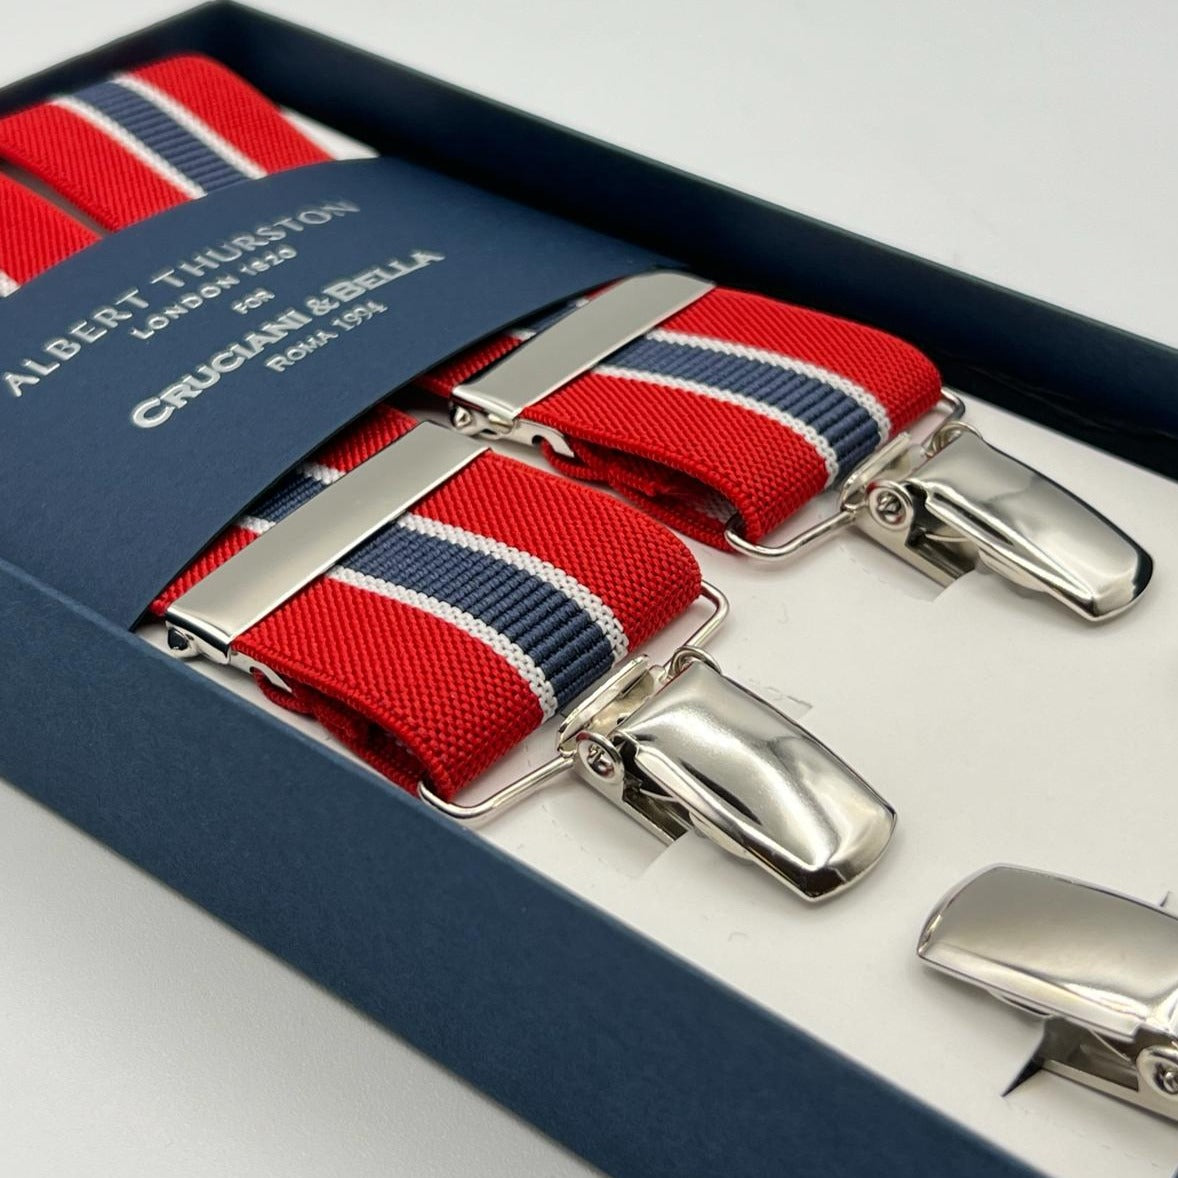 Albert Thurston for Cruciani & Bella Made in England Clip on Adjustable Sizing 35 mm elastic braces Red, White and Blue Stripes color X-Shaped Nickel Fittings Size: XL